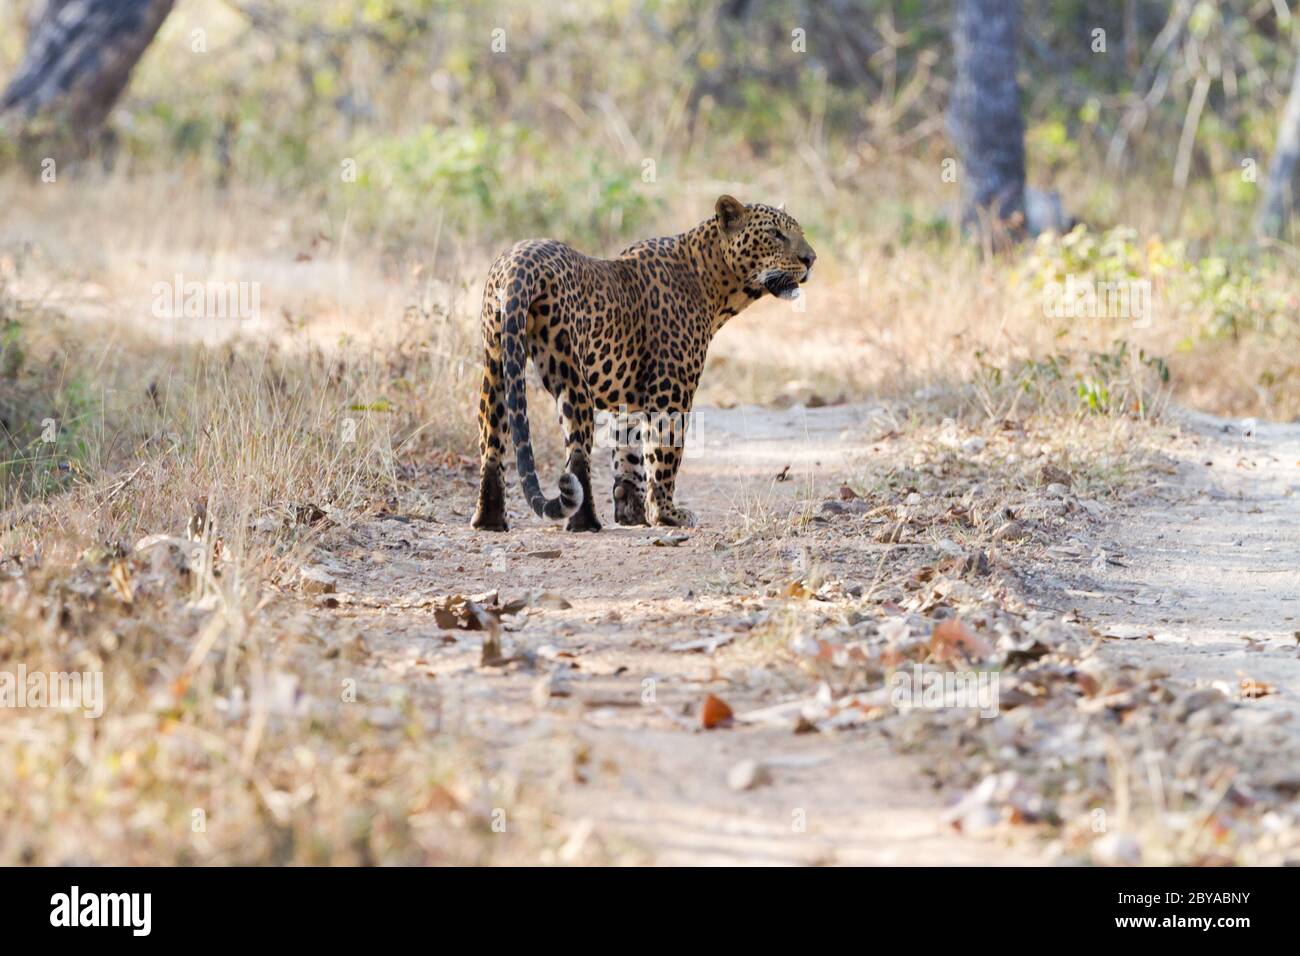 The Indian leopard (Panthera pardus fusca) inside the Bandipur National Park in Karnataka, India, Asia. Stock Photo